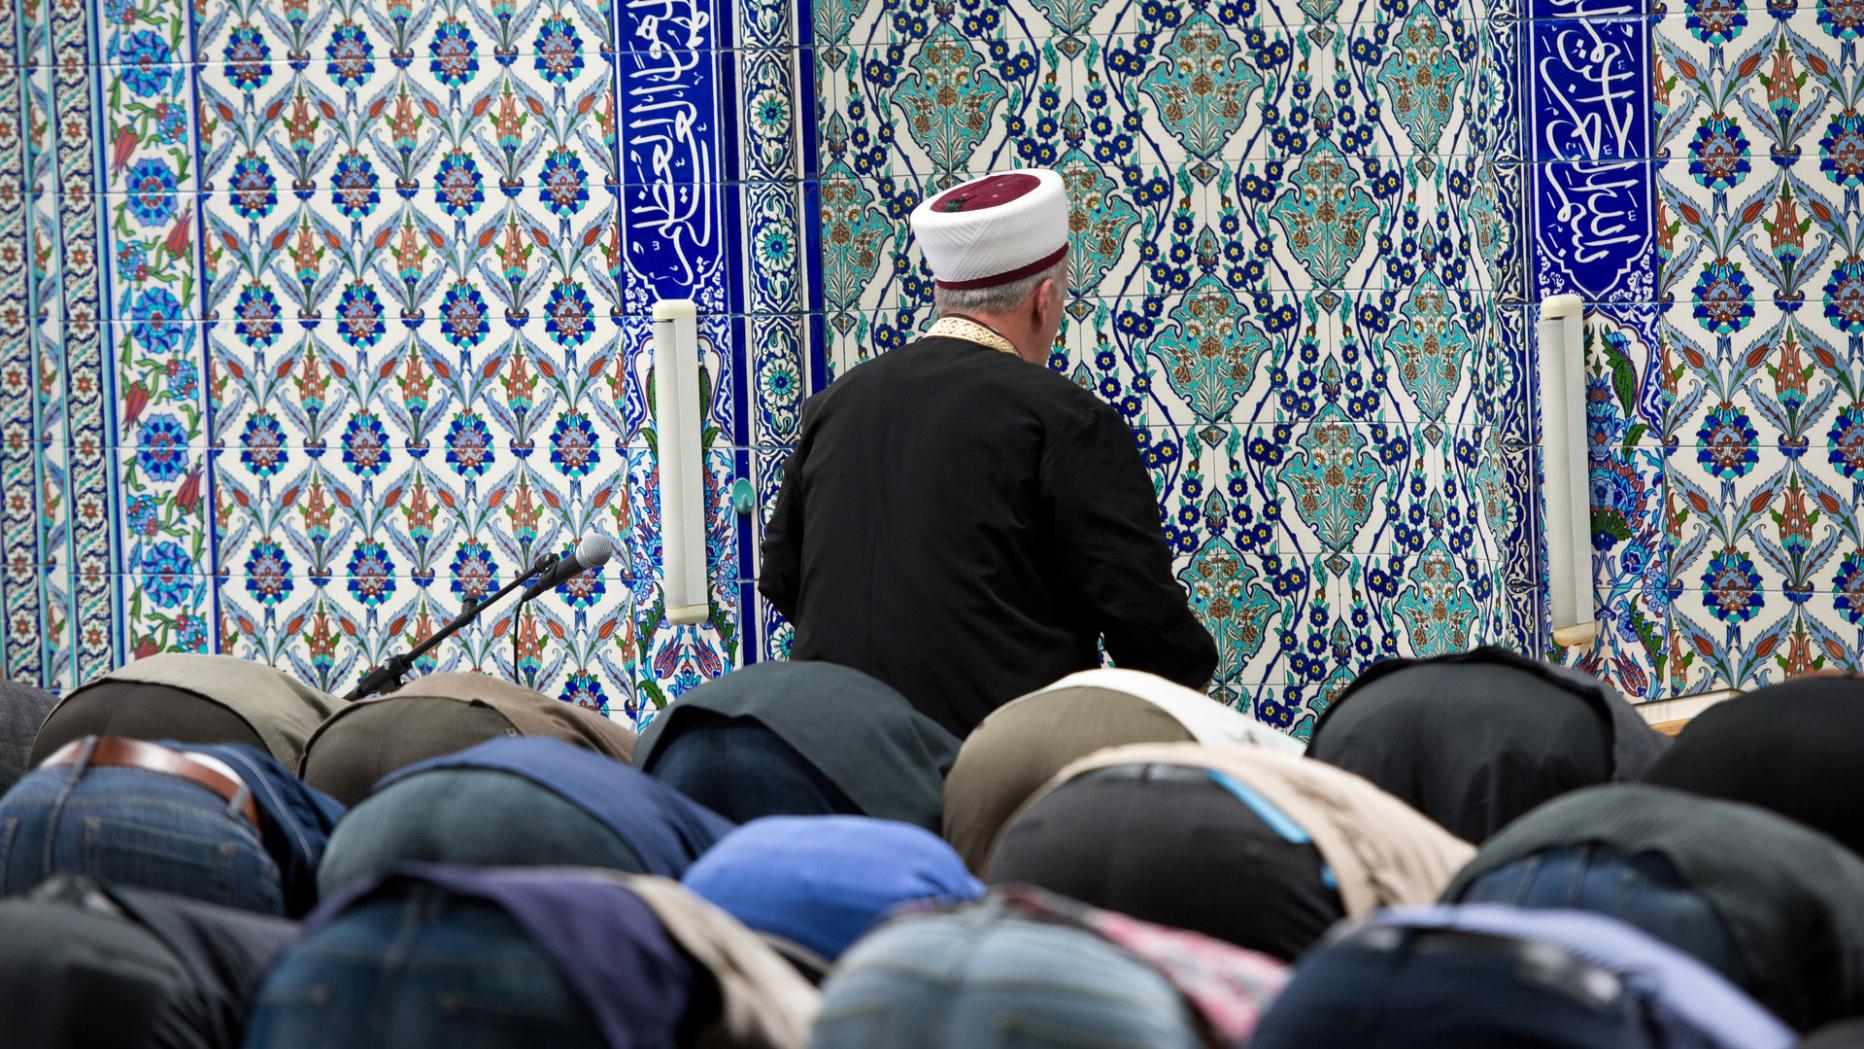 Austria has required the registration of all imams in the country.